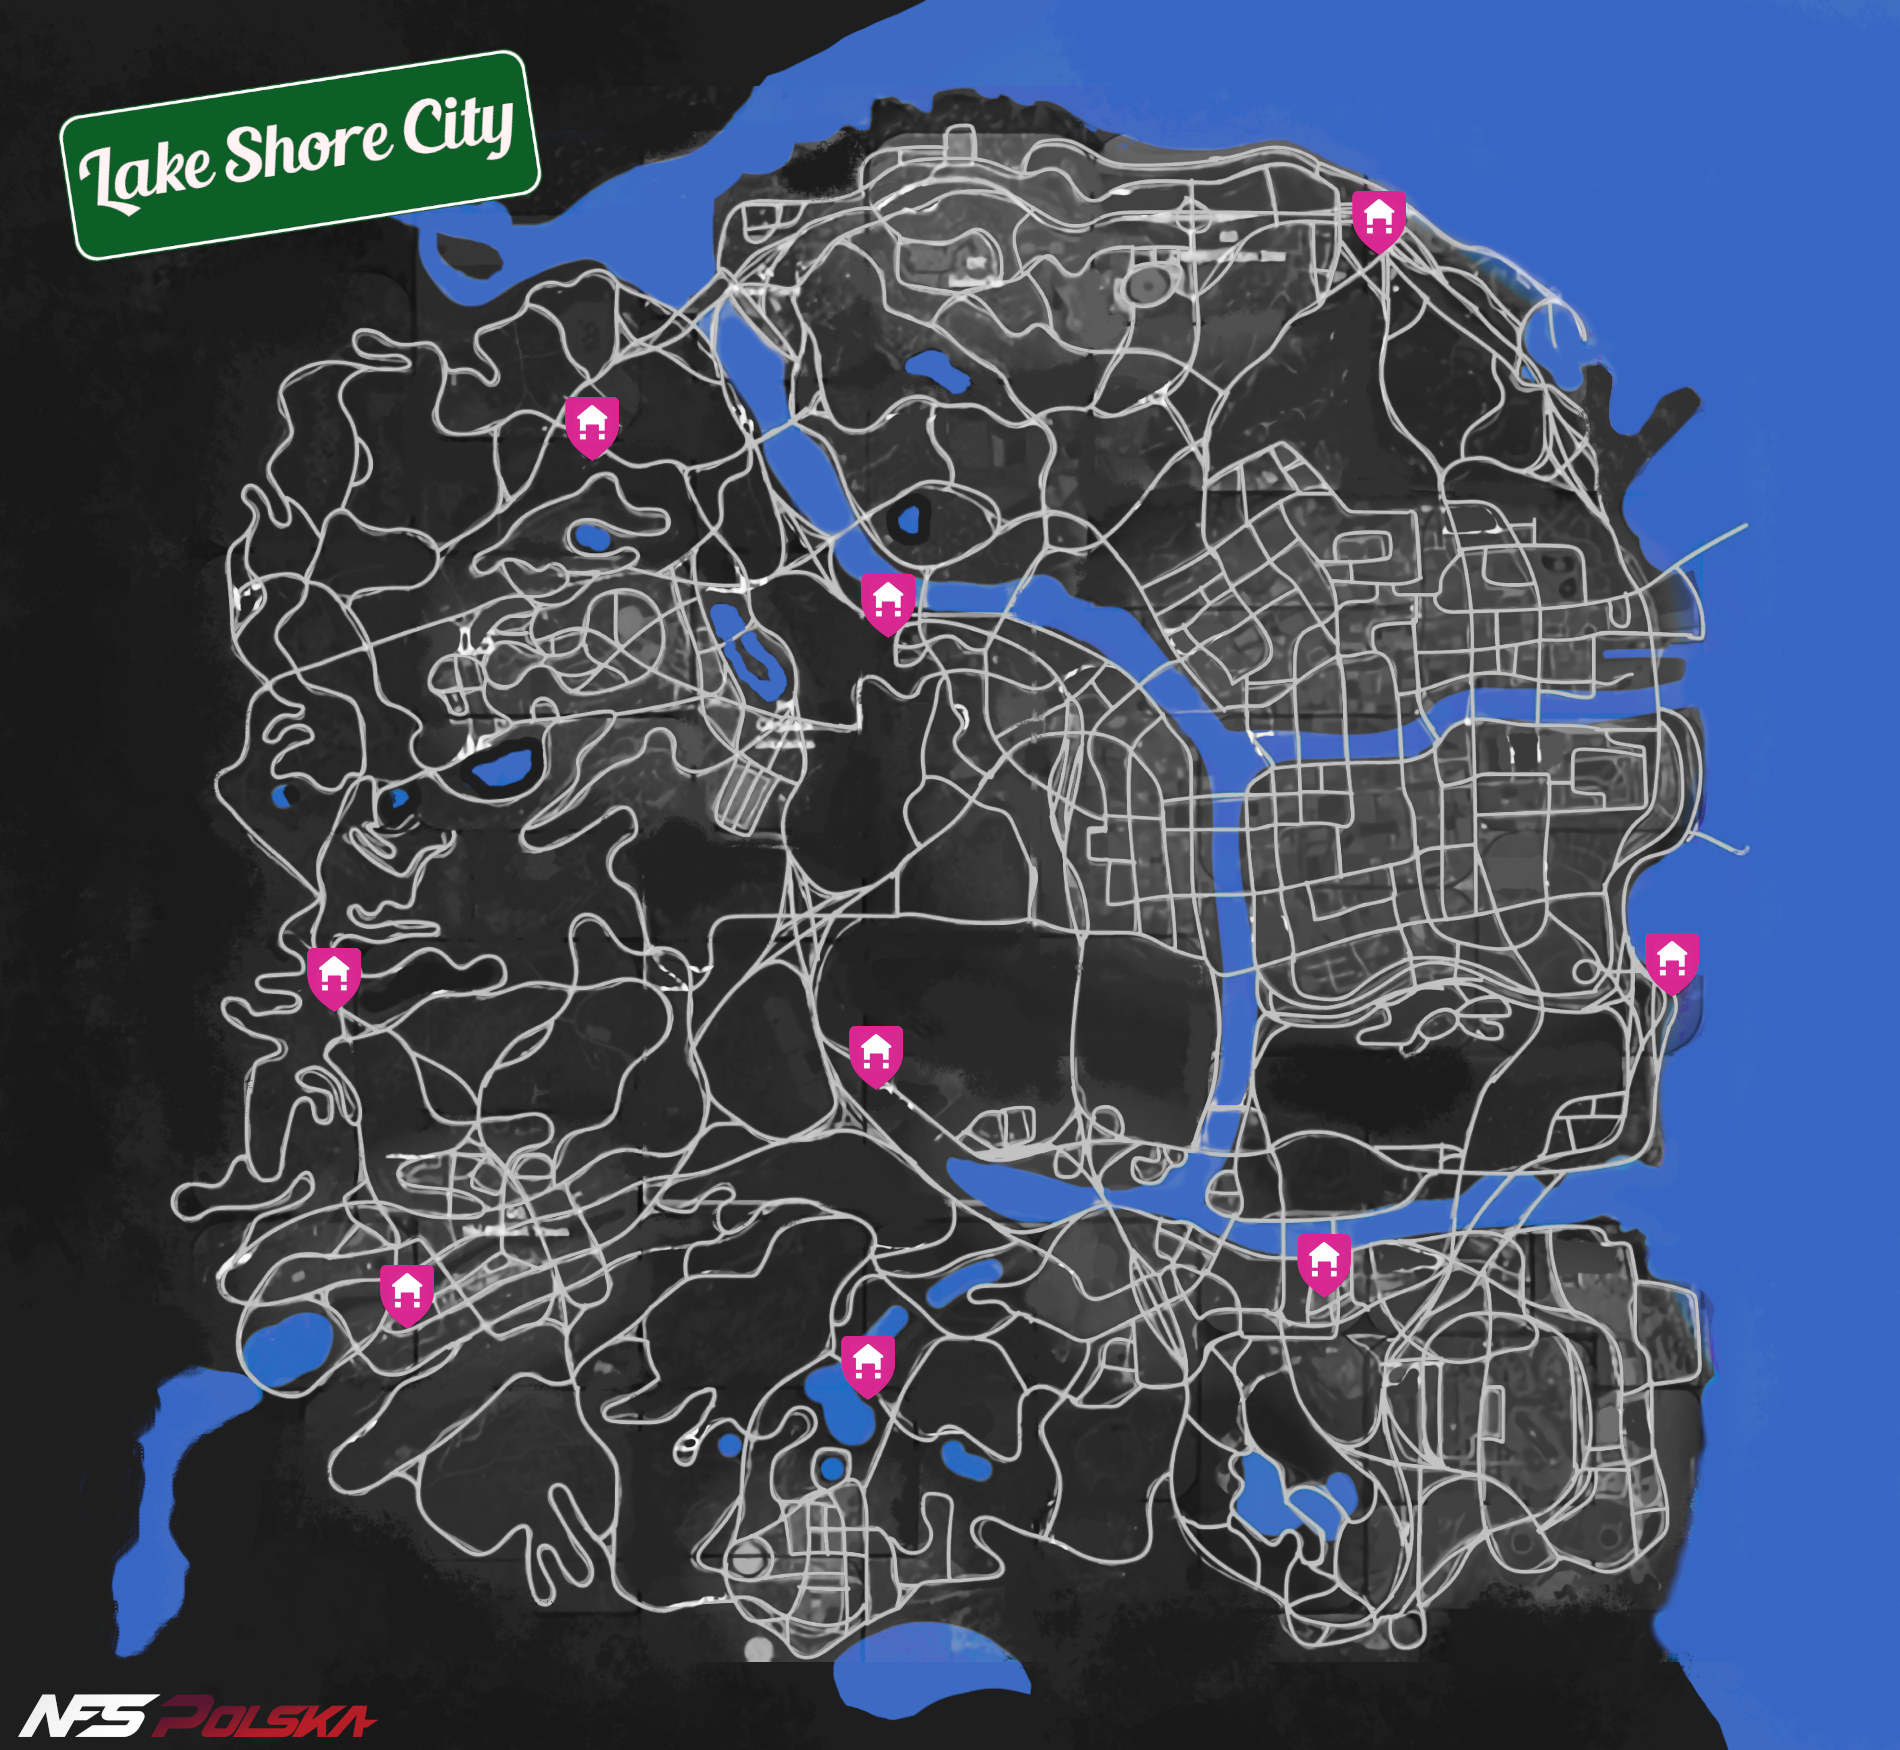 NFS - Need for Speed 2022 - Leak Lake Shore City map